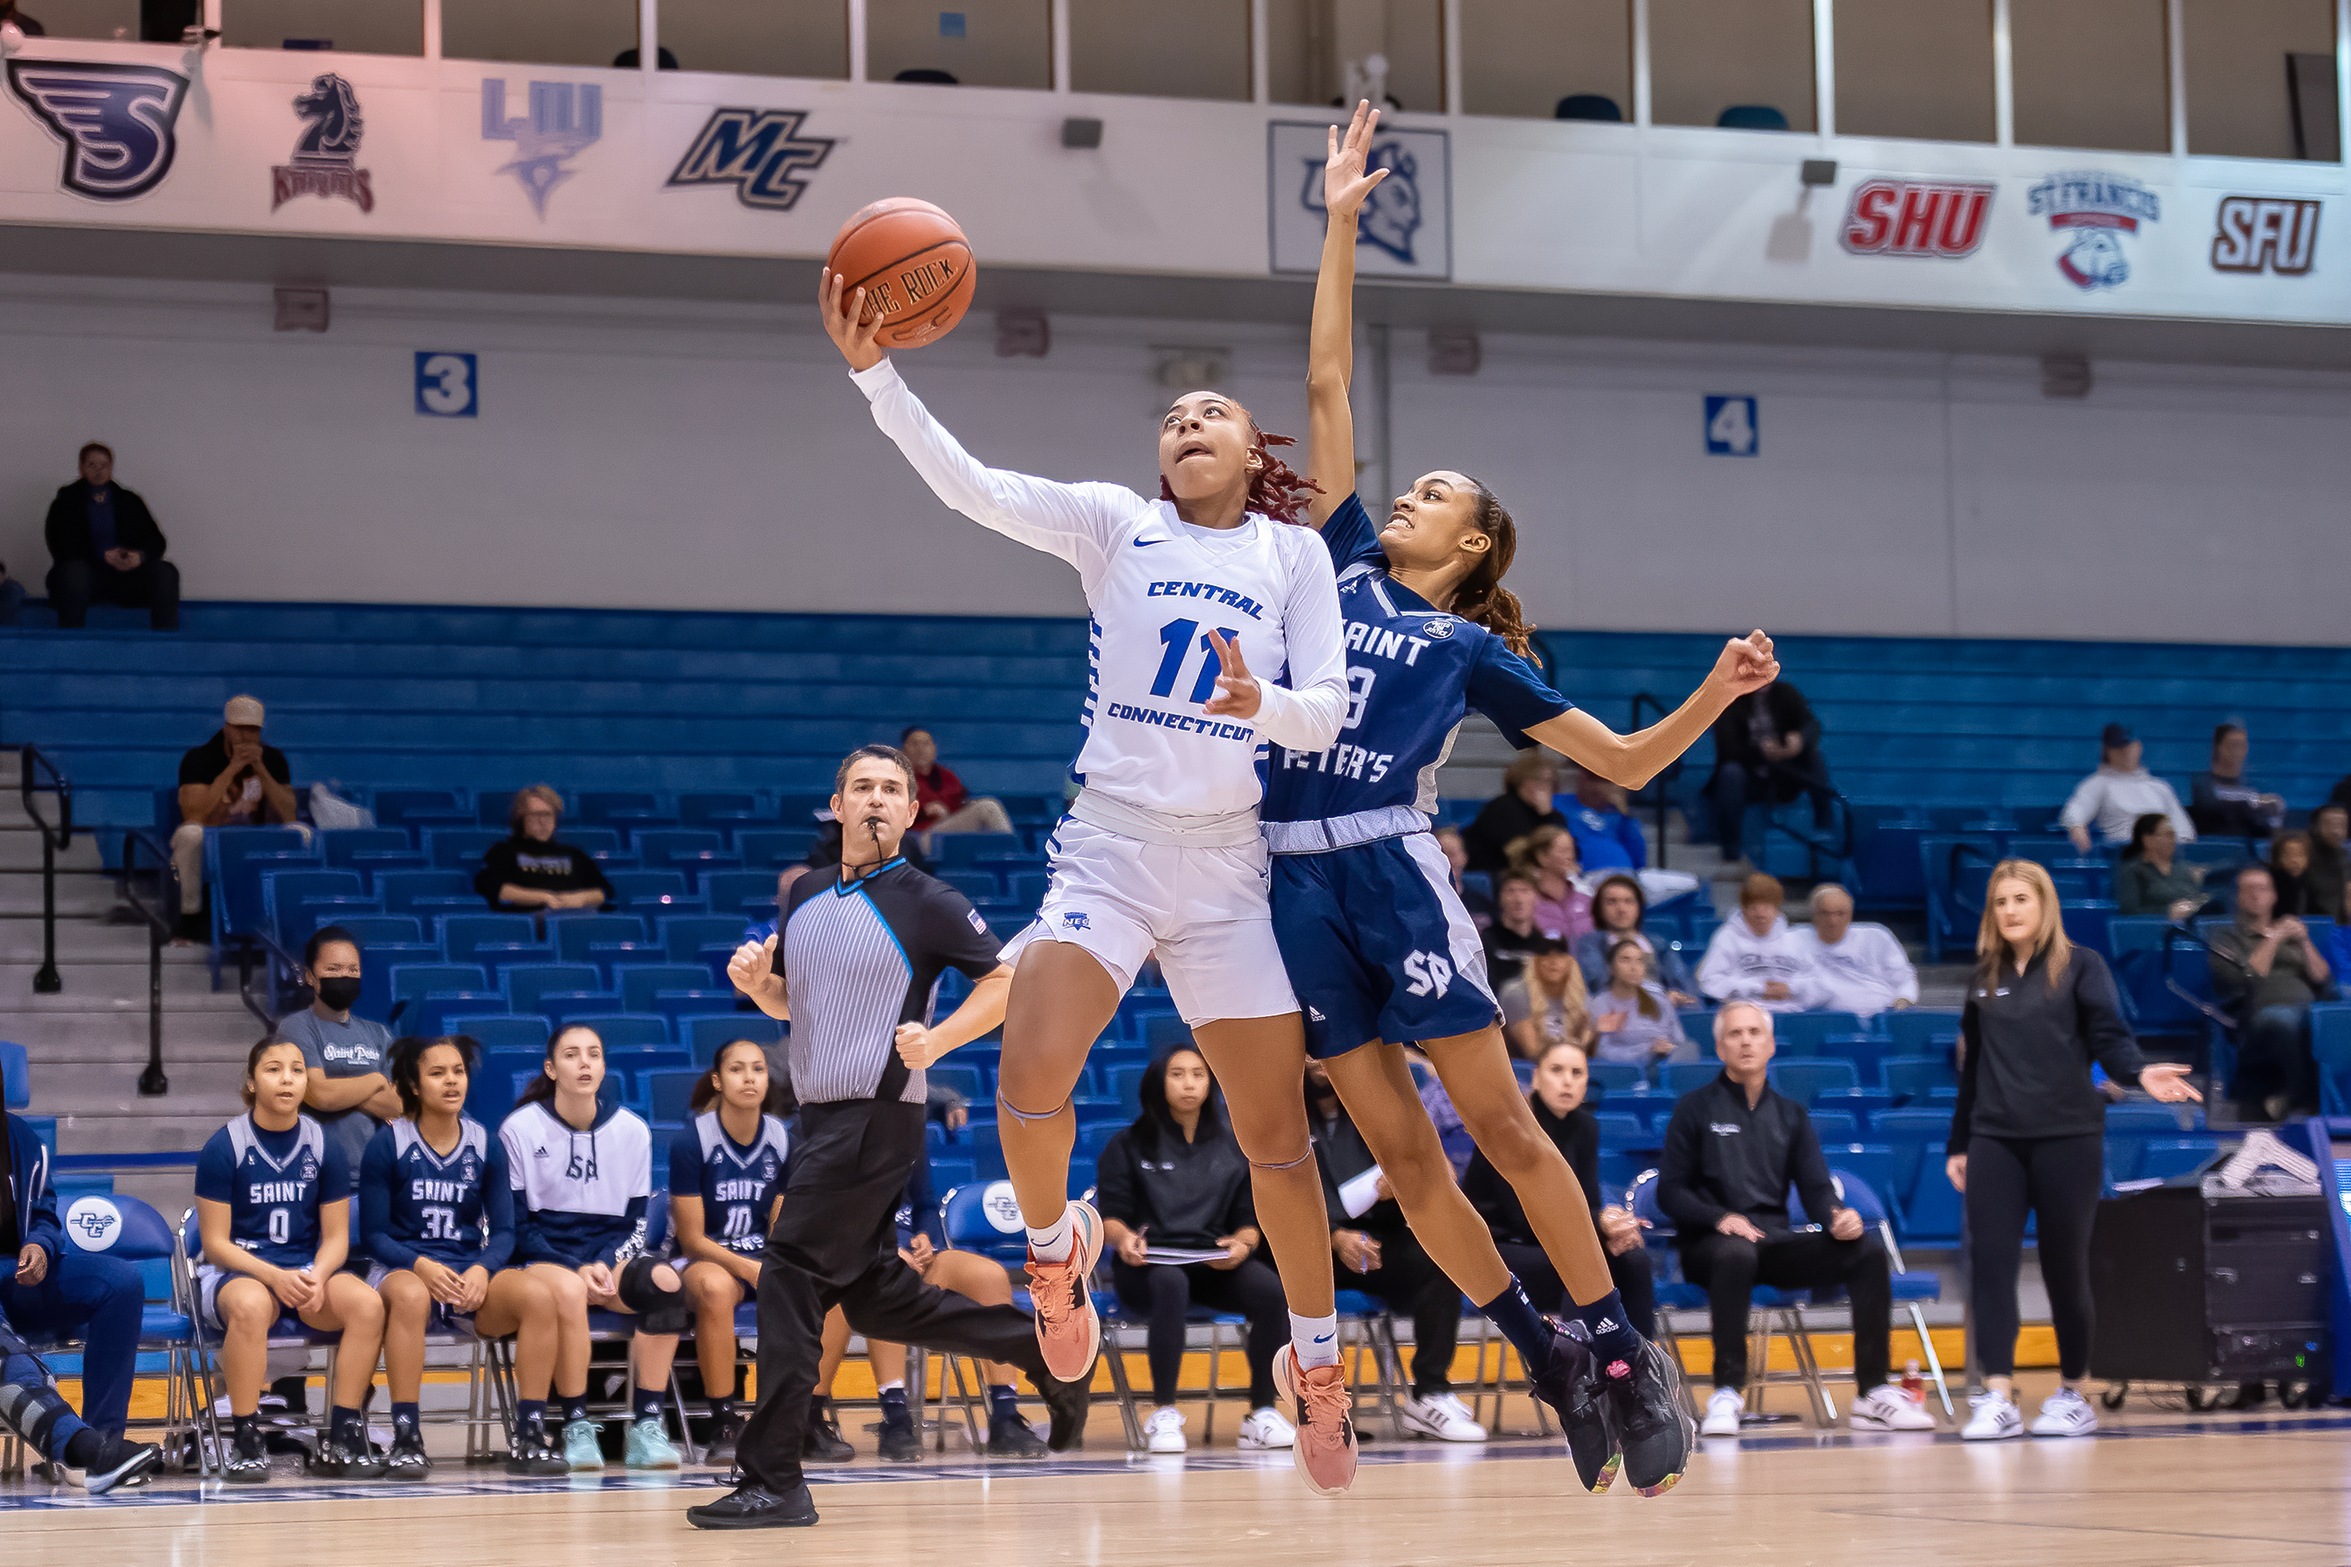 Dejah Jenkins scored 17 points in Wednesday's game. (Photo: Steve McLaughin)